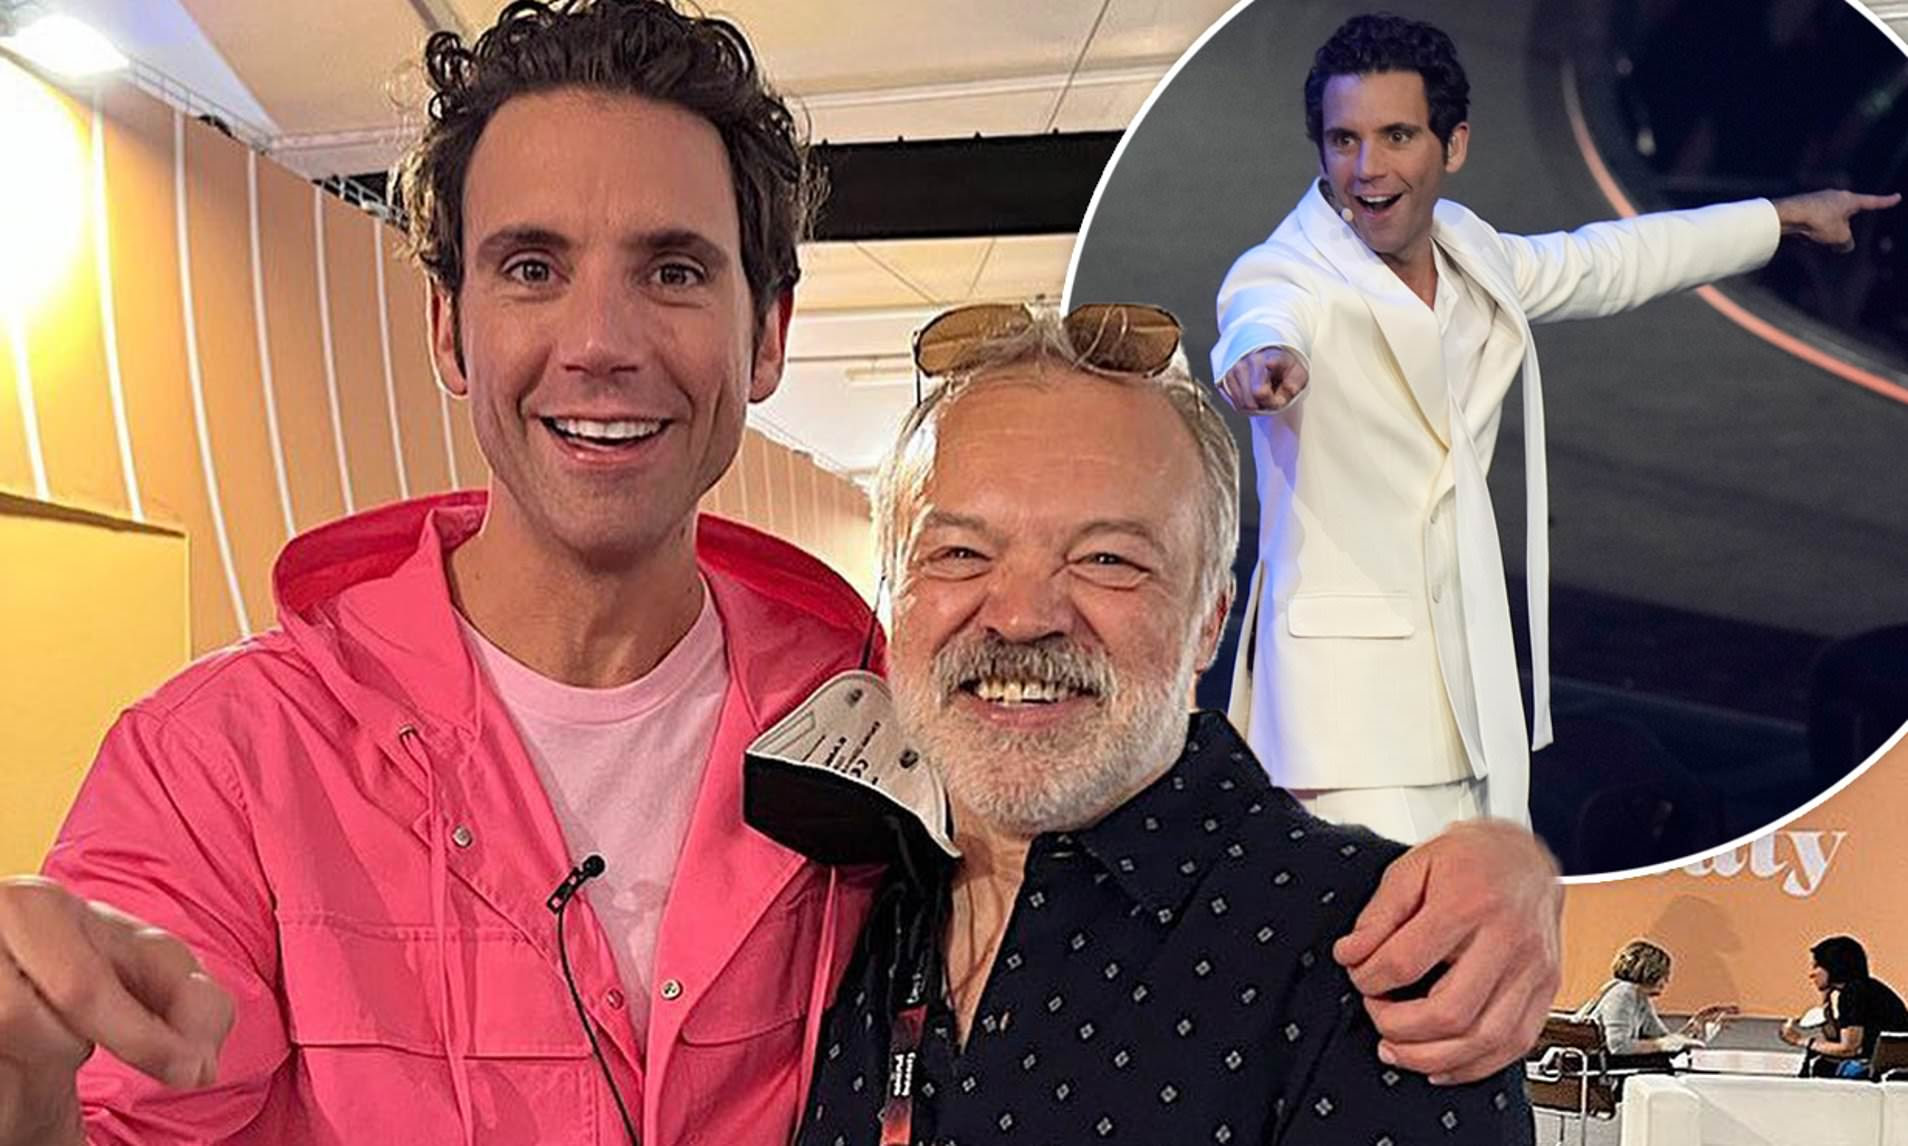 Eurovision host Mika grins as he poses for backstage snap with commentator Graham Norton